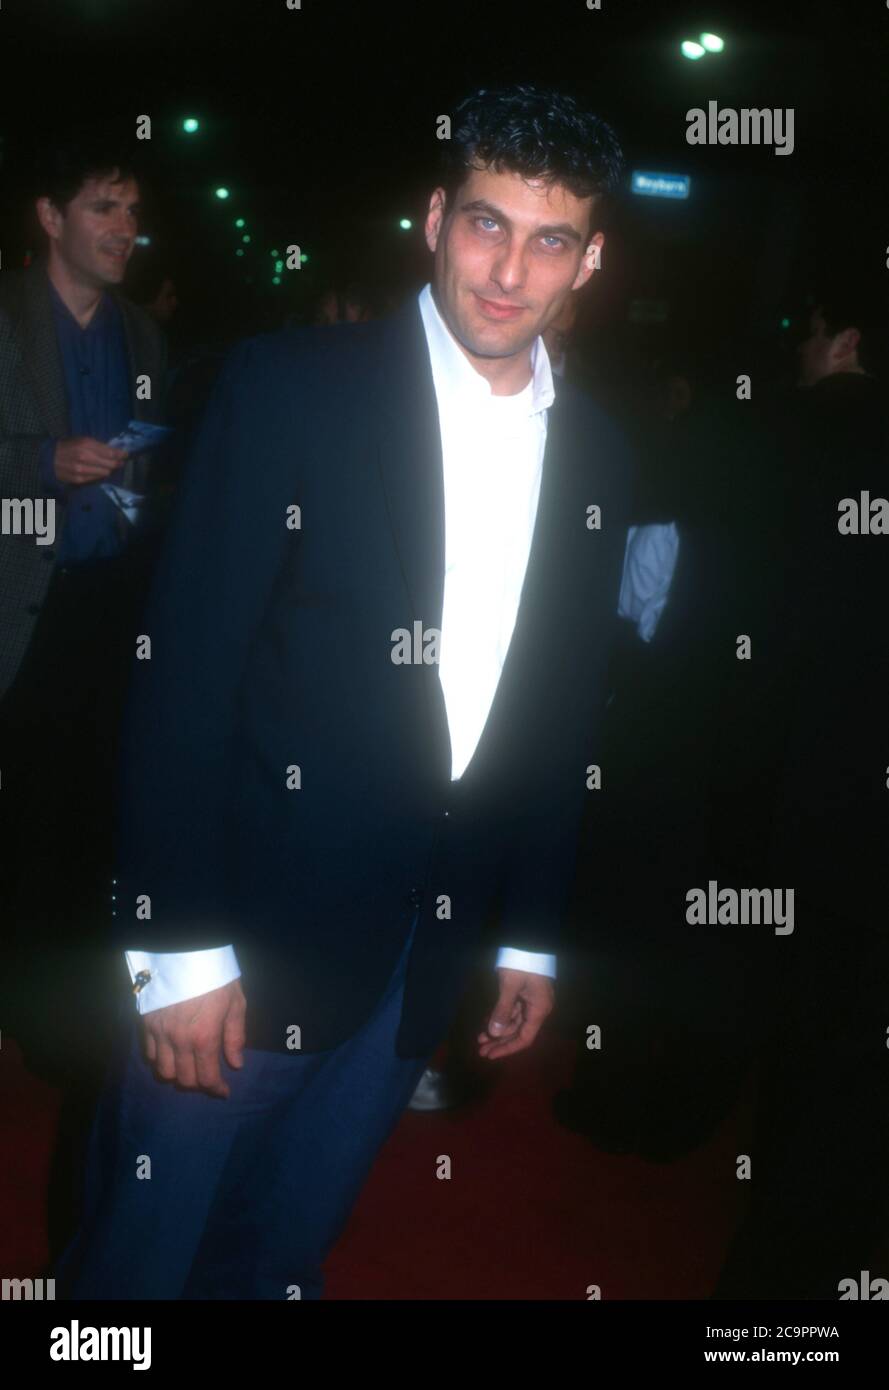 Westwood, California, USA 26th February 1996 Actor Jonathan Perner attends 20th Century Fox' 'Down Periscope' Premiere on February 26, 1996 at Mann's Village Theatre in Westwood, California, USA. Photo by Barry King/Alamy Stock Photo Stock Photo